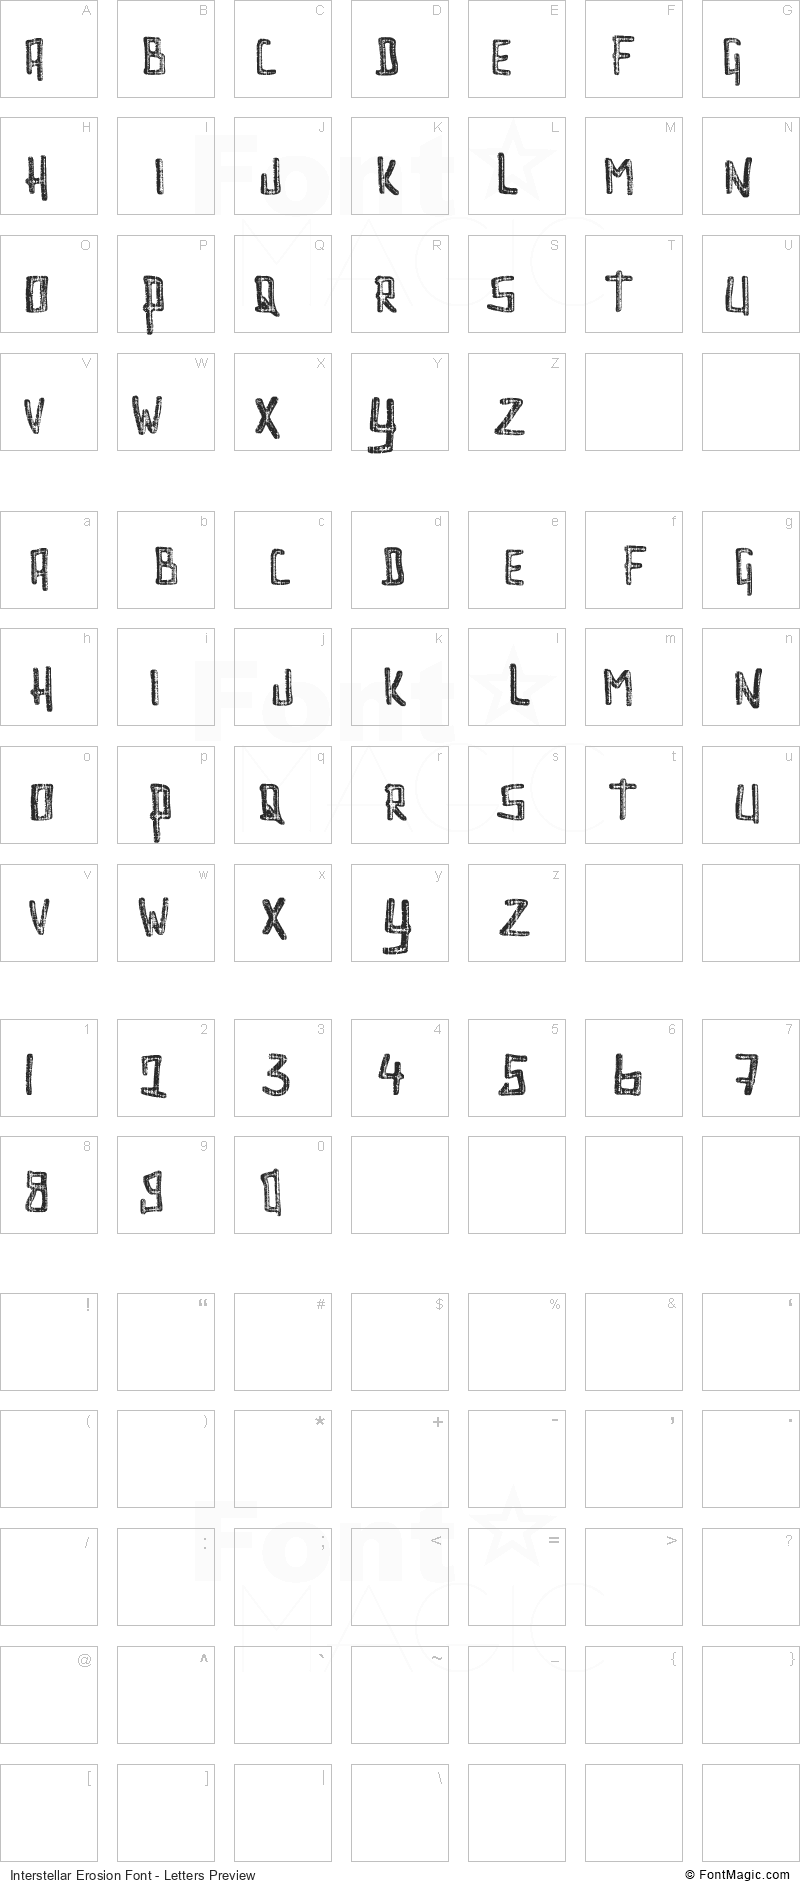 Interstellar Erosion Font - All Latters Preview Chart